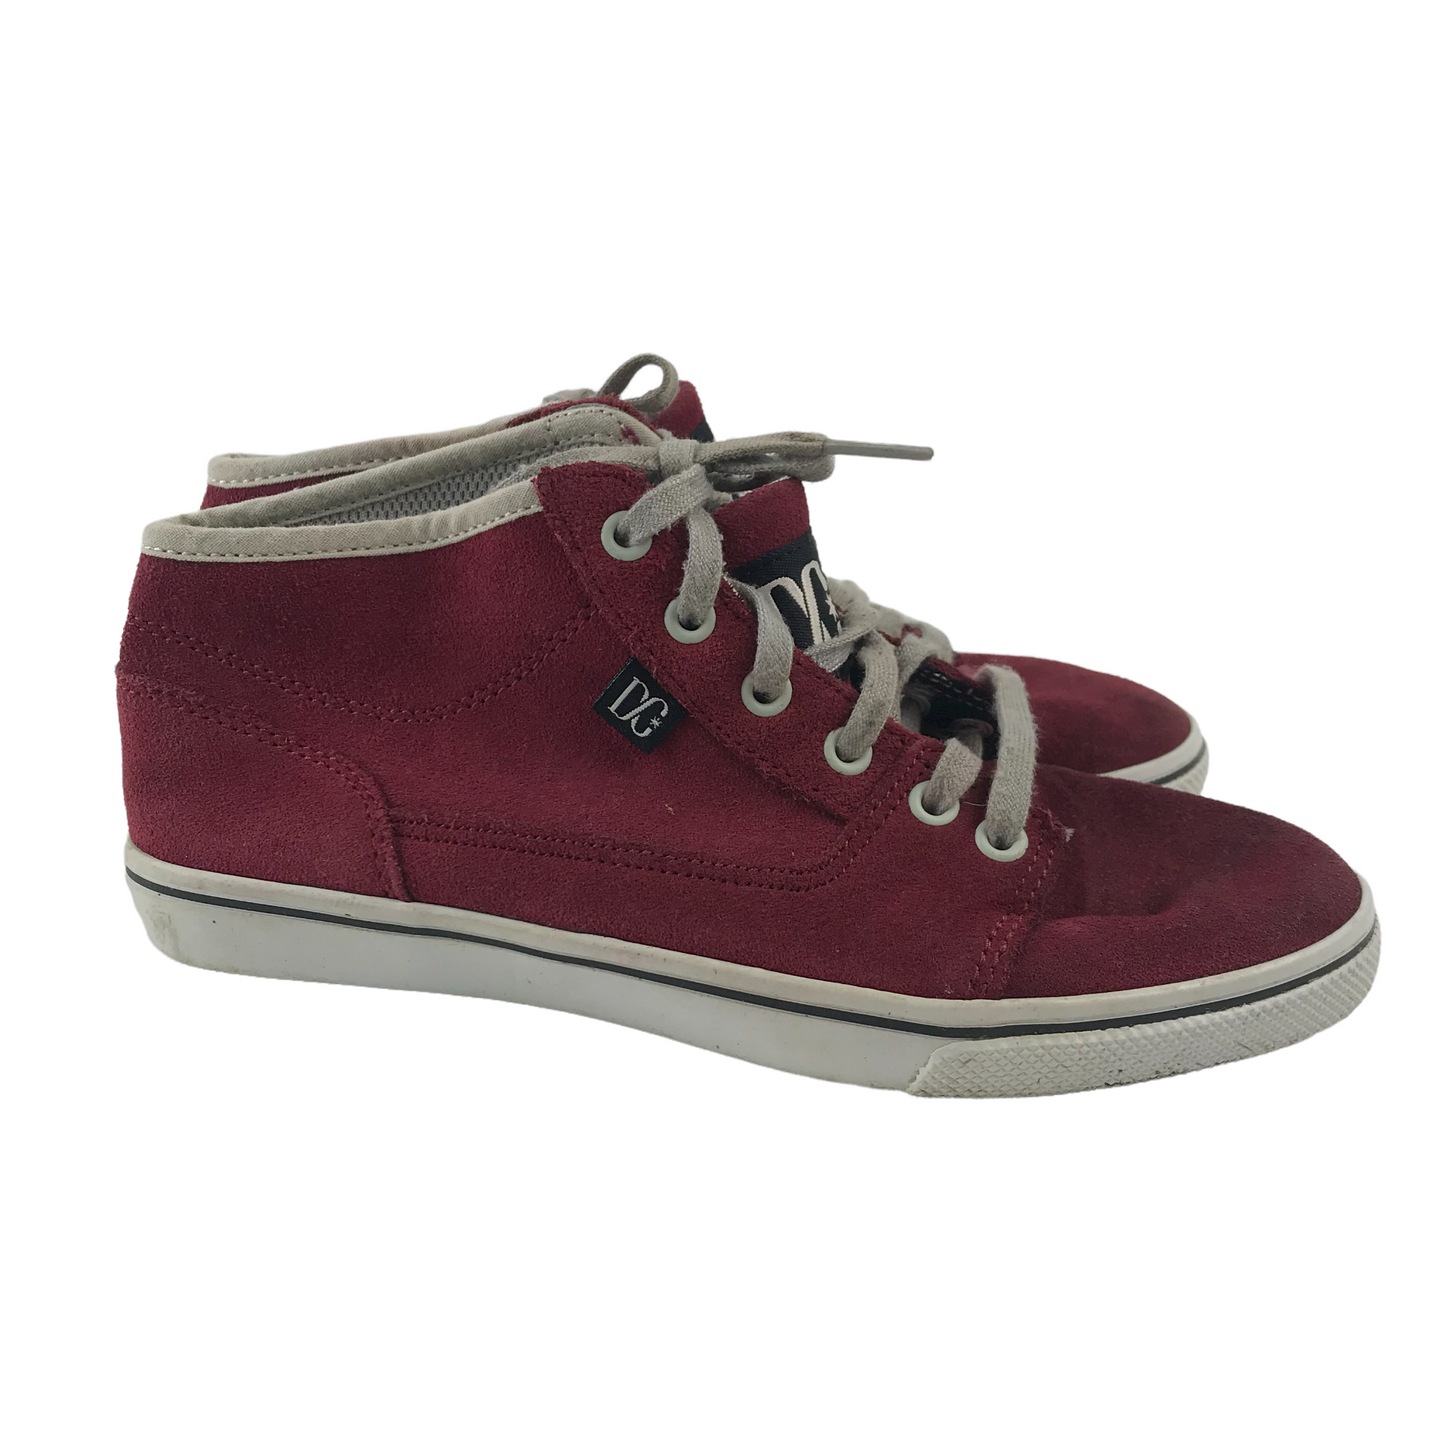 DC Burgundy Leather High Tops Trainers Shoe Size 3